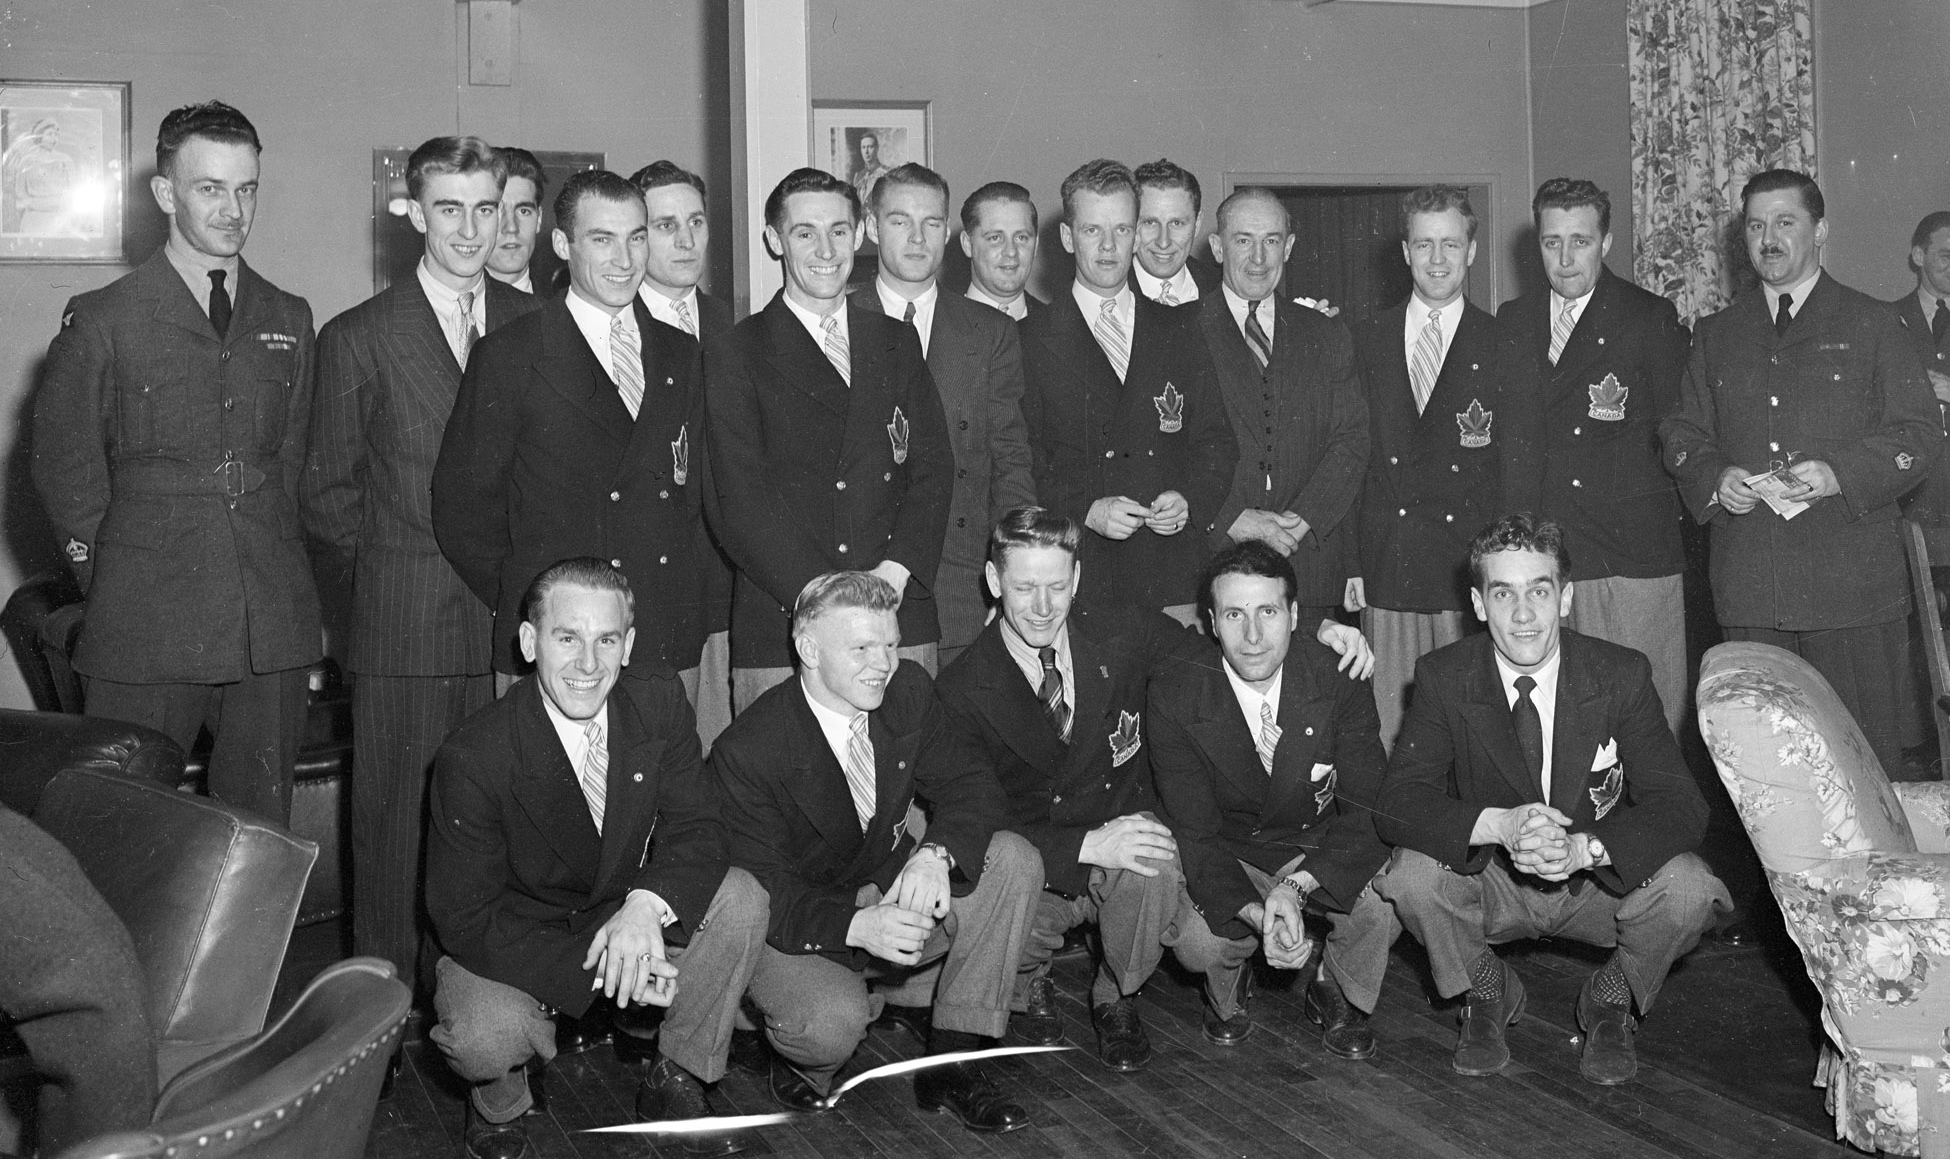 The 1948 Olympic Champion RCAF Flyers gather for a photograph after receiving a tremendous ovation in the Sergeant’s Mess at Ottawa's Beaver Barracks on April 8, 1948. Front row (left to right): Reg Schroeter, Orval Gravelle, Roy Forbes, Patsy Guzzo and Ted Hibberd. Back row (left to right): Warrant Officer Class 2 W.H. Fader, vice-president of the mess, Murray Dowey, Pete Lietchnitz, Hubert Brooks, Frank Dunster, Ab Renaud, George Mara, Louis LeCompte, Ross King, Sandy Watson, George “Buck” Boucher, Frank Boucher, Corporal George McFaul and Warrant Officer Class 2 Colin Campbell. Absent from the photo are André Laperrière and Wally Halder. George Boucher, Sergeant Frank Boucher’s father, assisted in selecting the team, but could not be a member as he was a professional NHL player. PHOTO: DND Archives, PL-38853